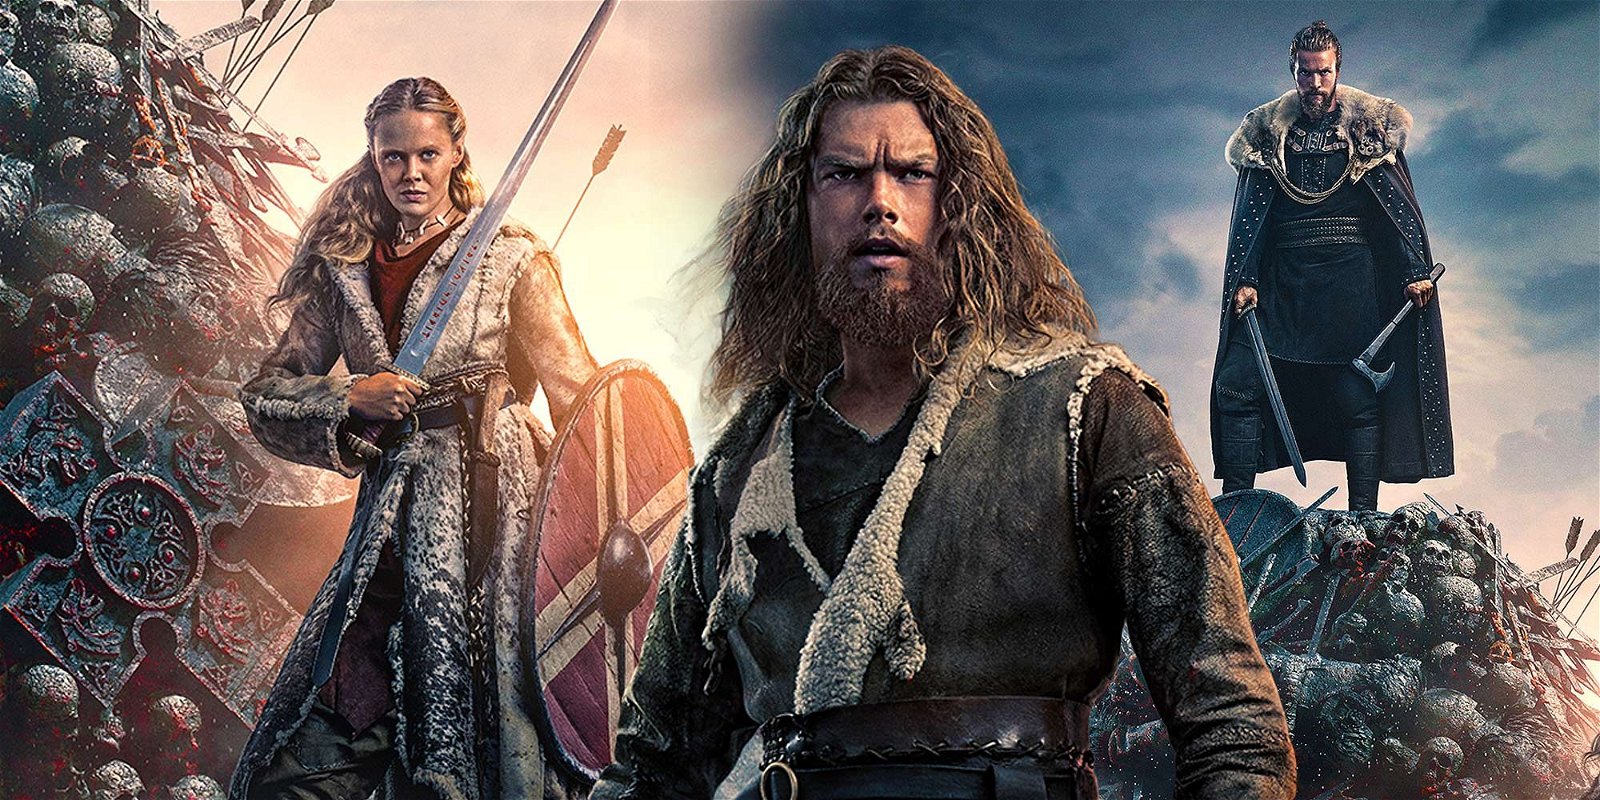 The Original Vikings Stars Have Some Really Helpful Advice for the Vikings Valhalla Cast